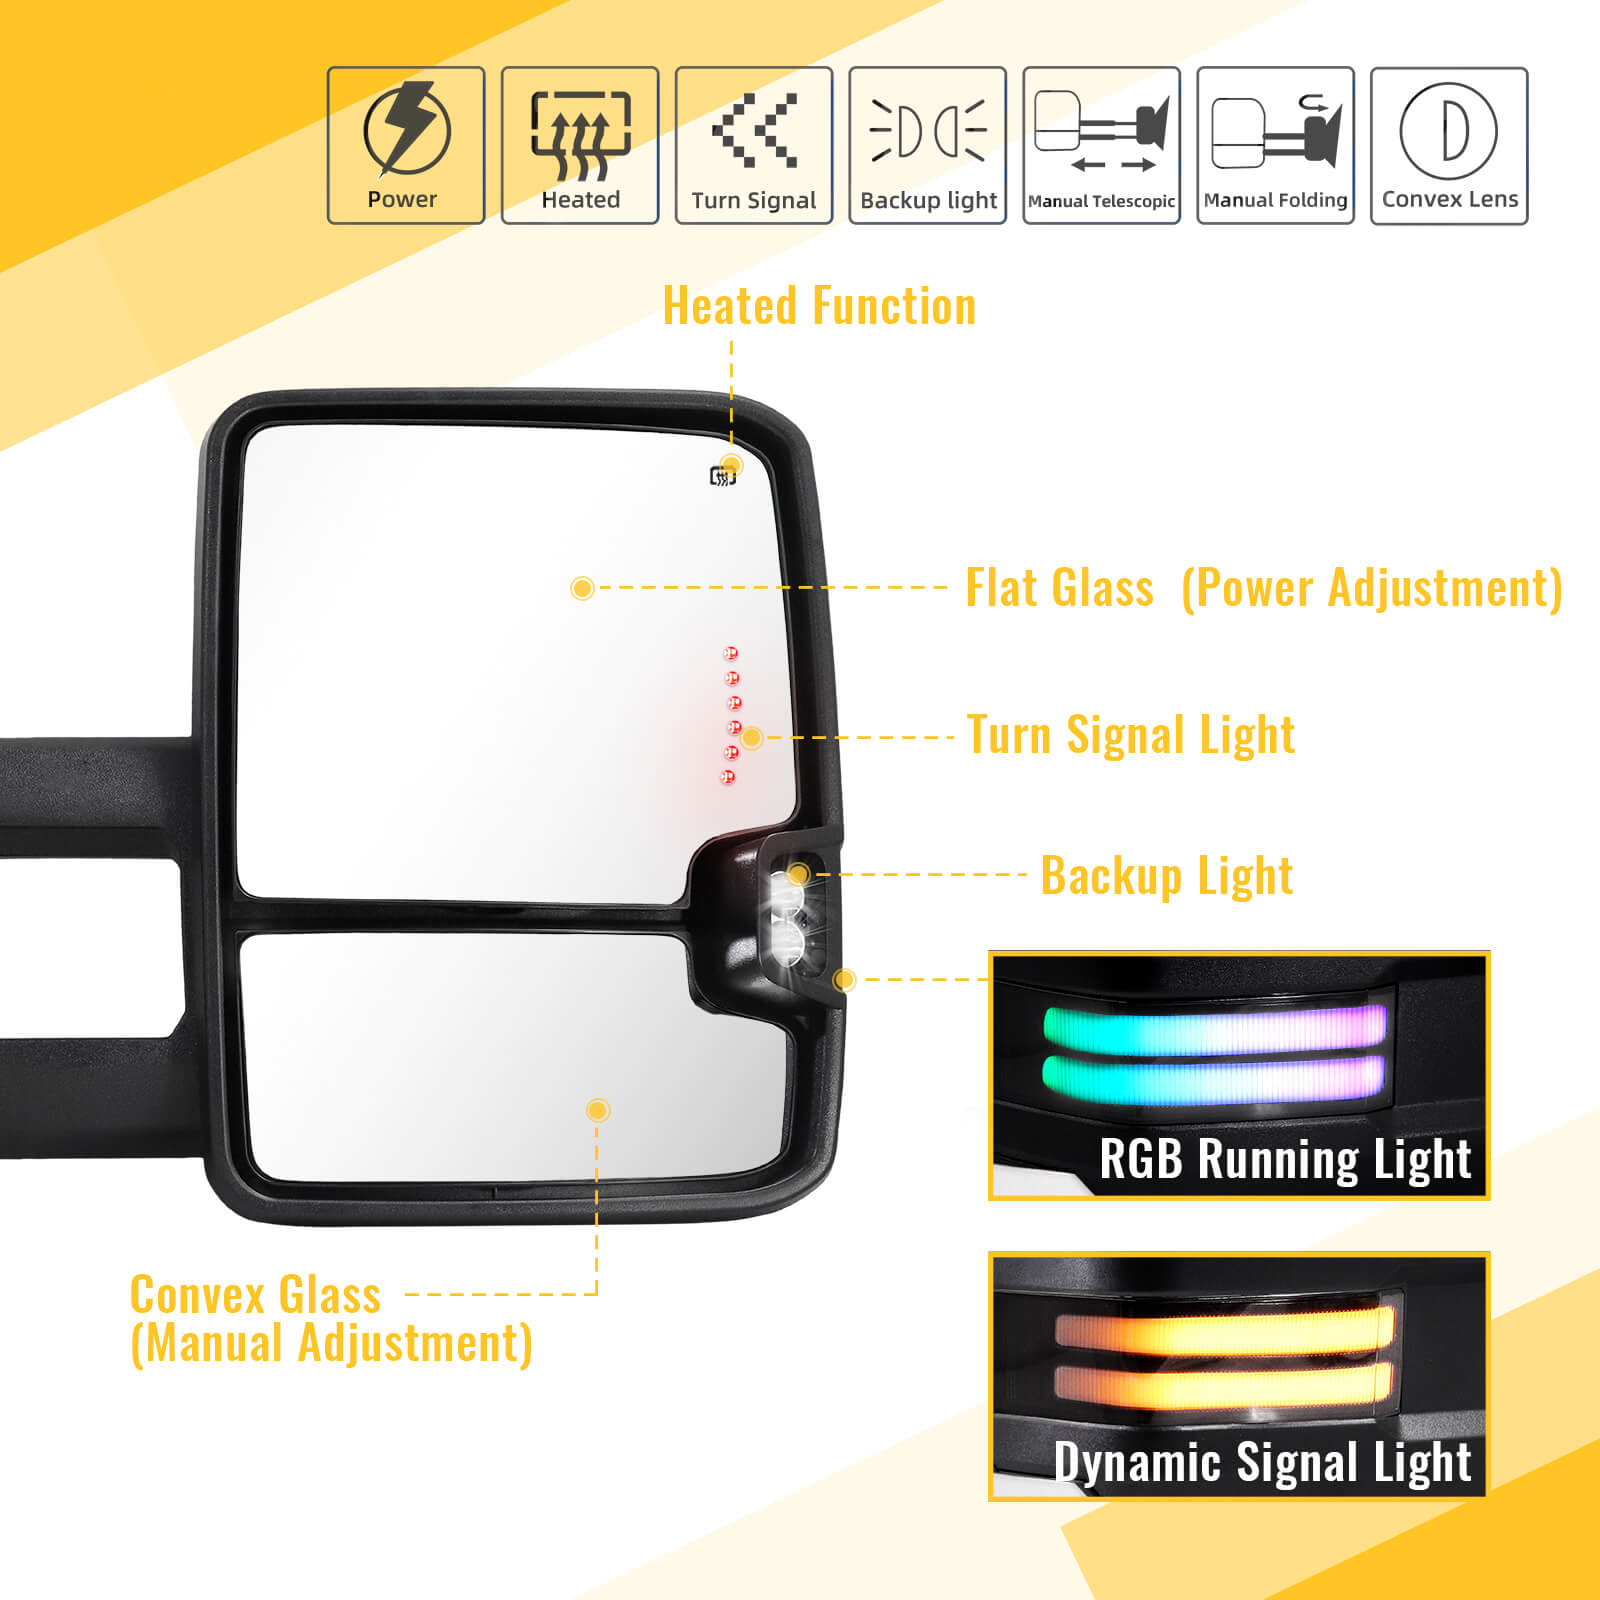 RGB Towing Mirrors with Adjustable Lighting for 2014 - 2019 CHEVY Silverado GMC Sierra etc.